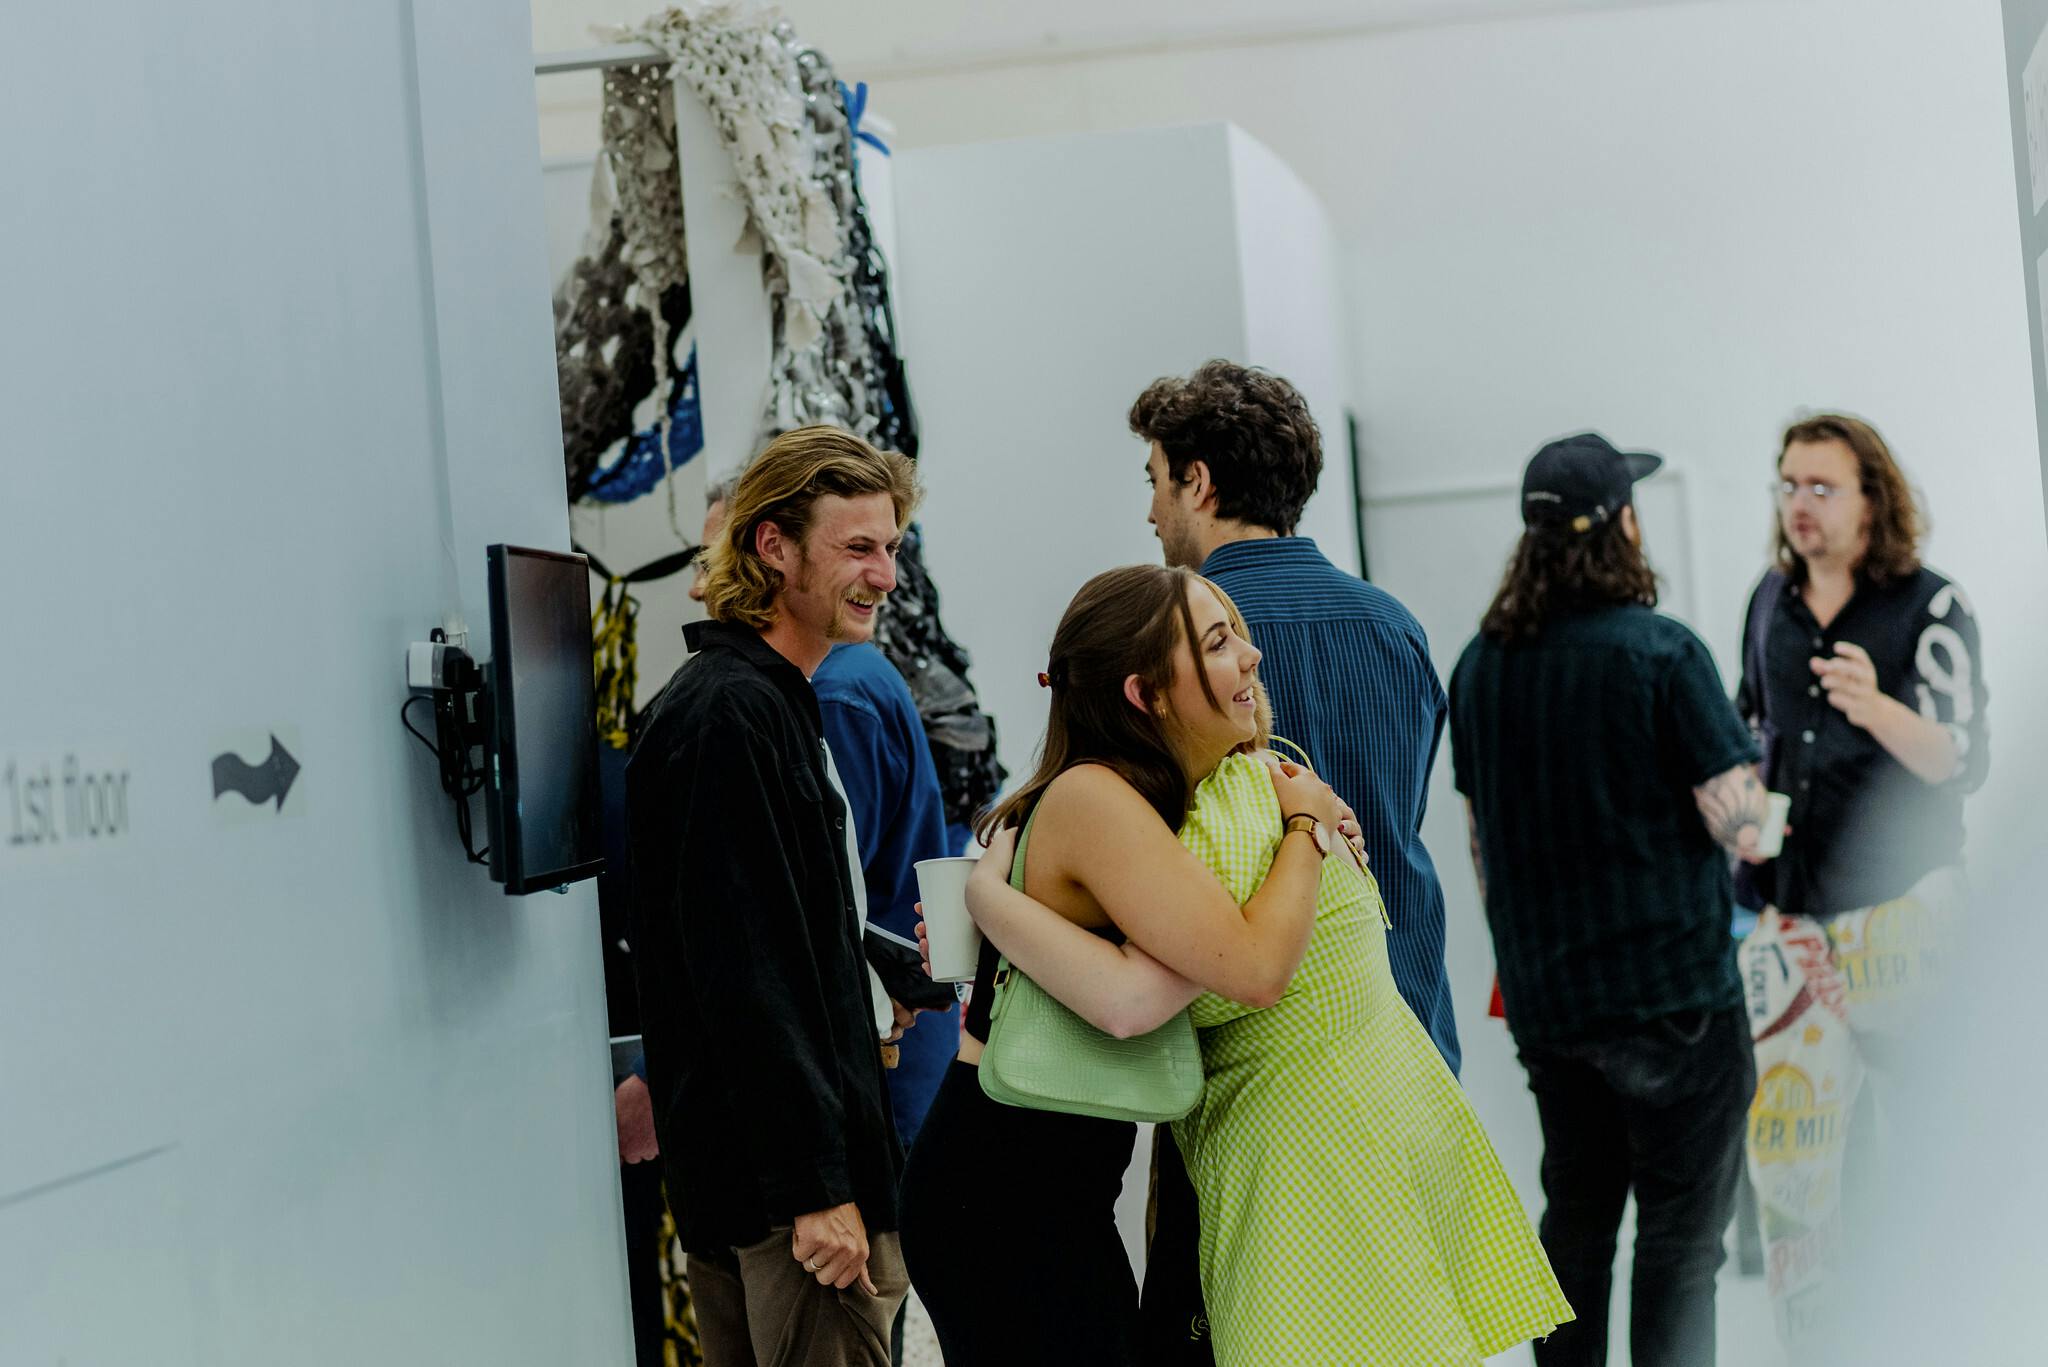 A girl in a green dress embraces a friend at an art exhibition